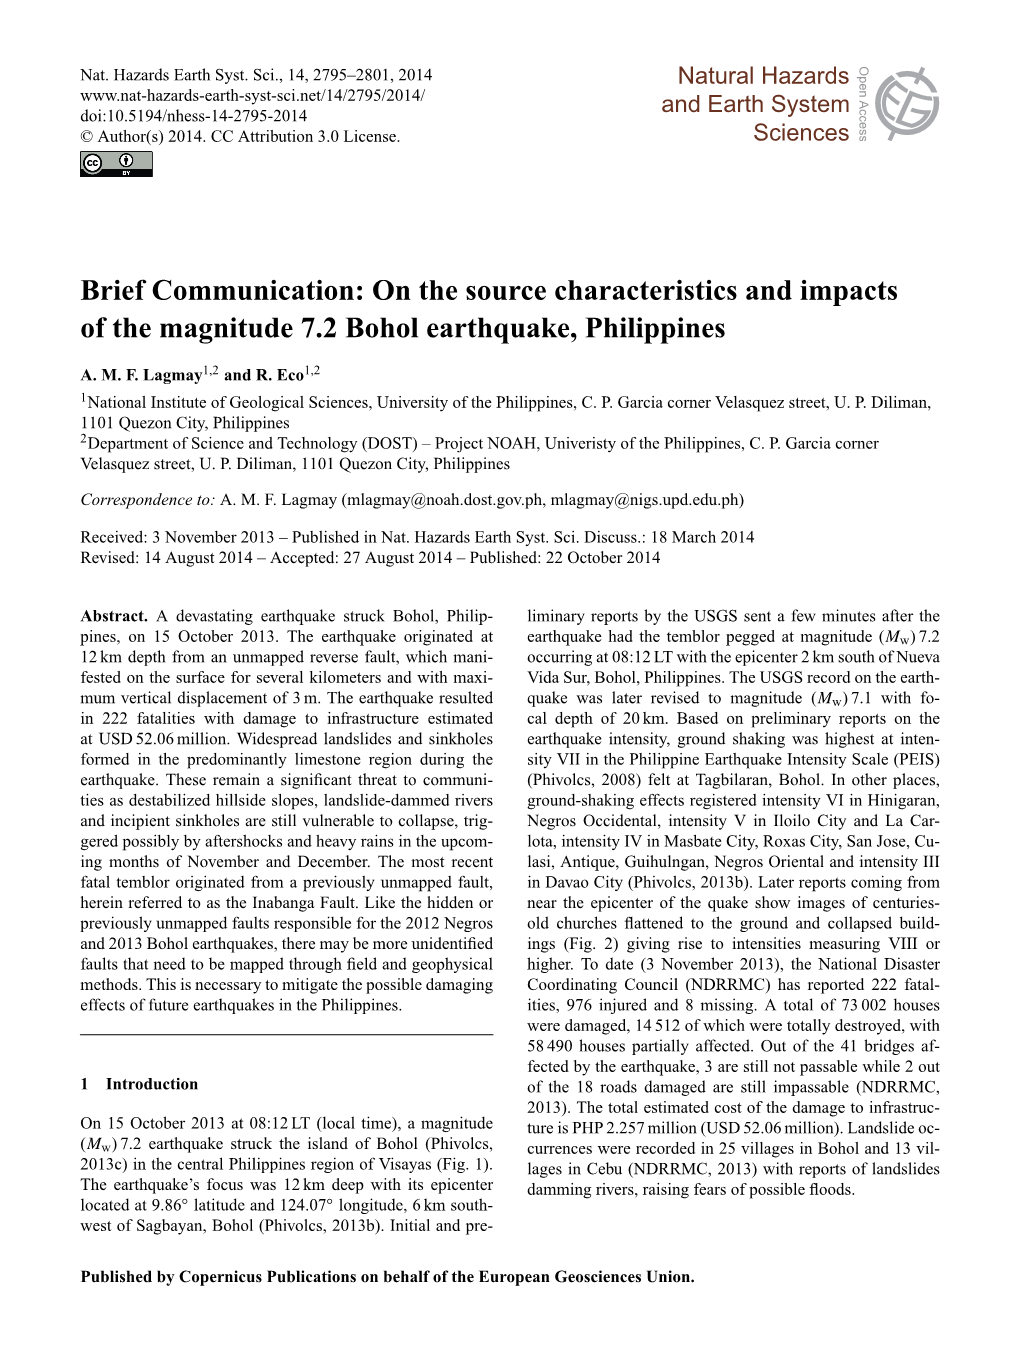 On the Source Characteristics and Impacts of the Magnitude 7.2 Bohol Earthquake, Philippines